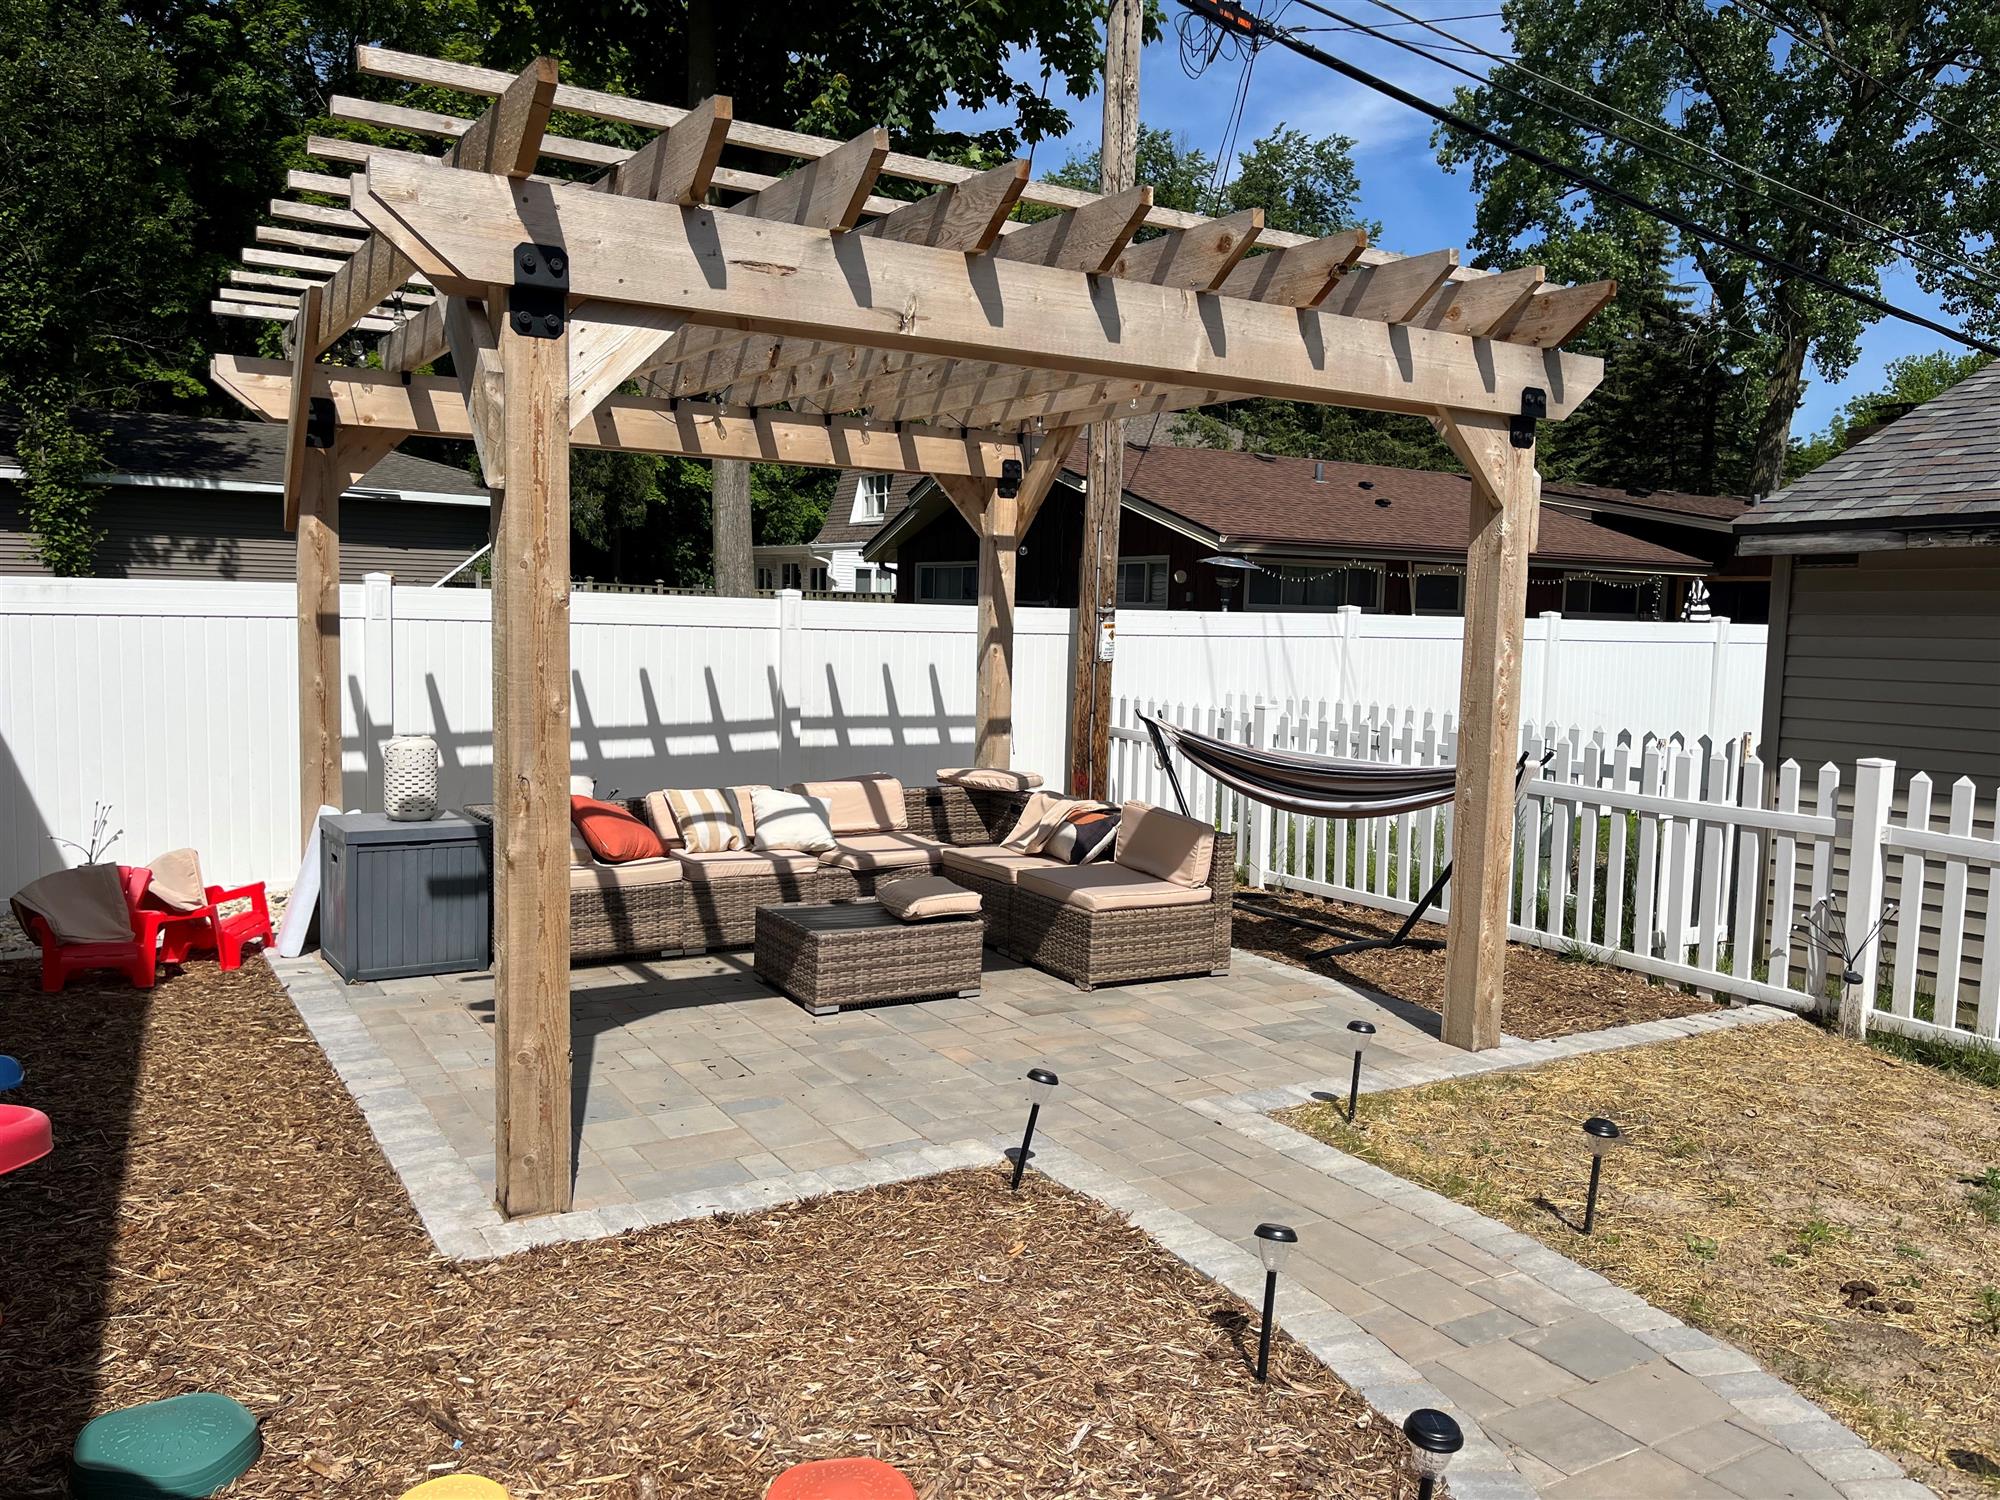 Large Pergola Area for Outdoor Dining and Entertaining